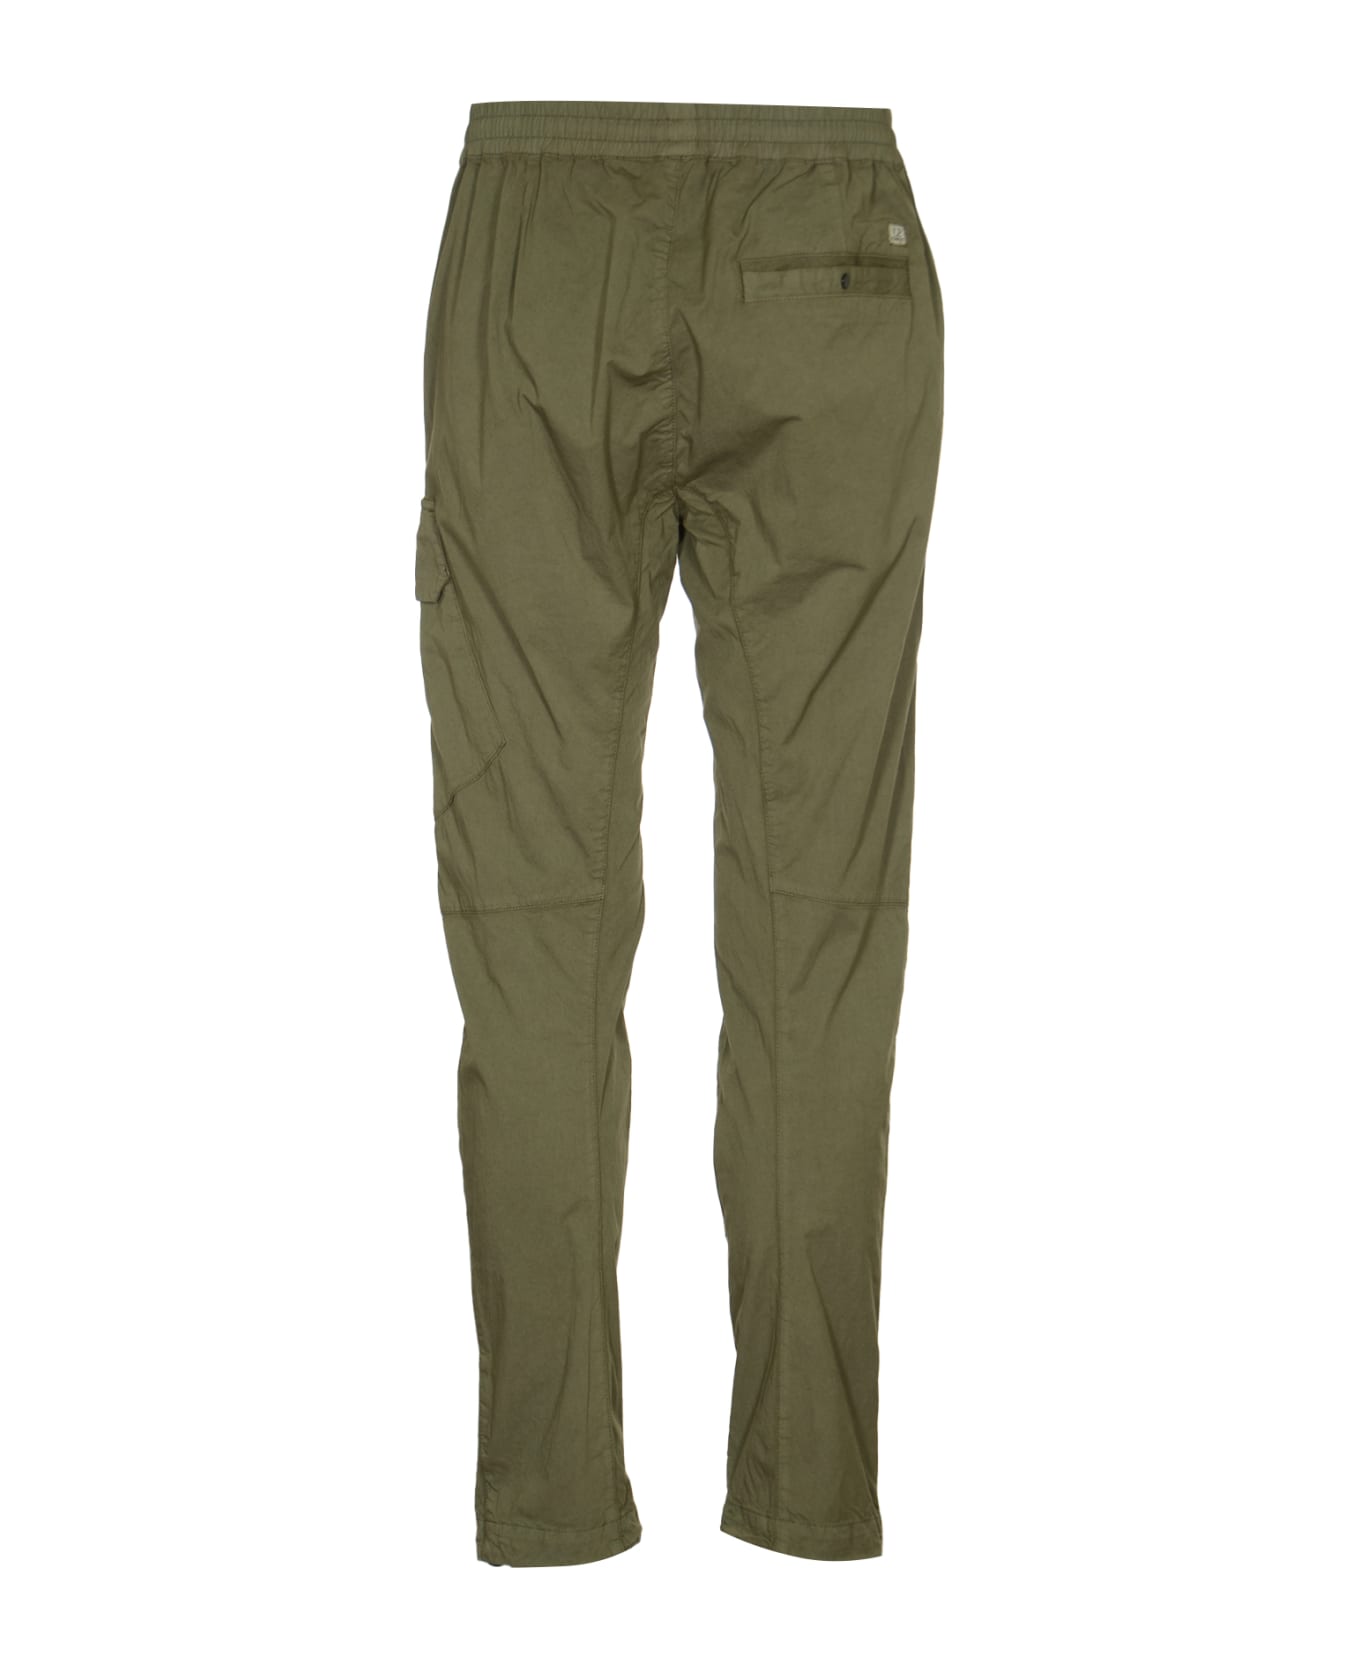 C.P. Company Twill Stretch Cargo Pants - AGAVE GREEN